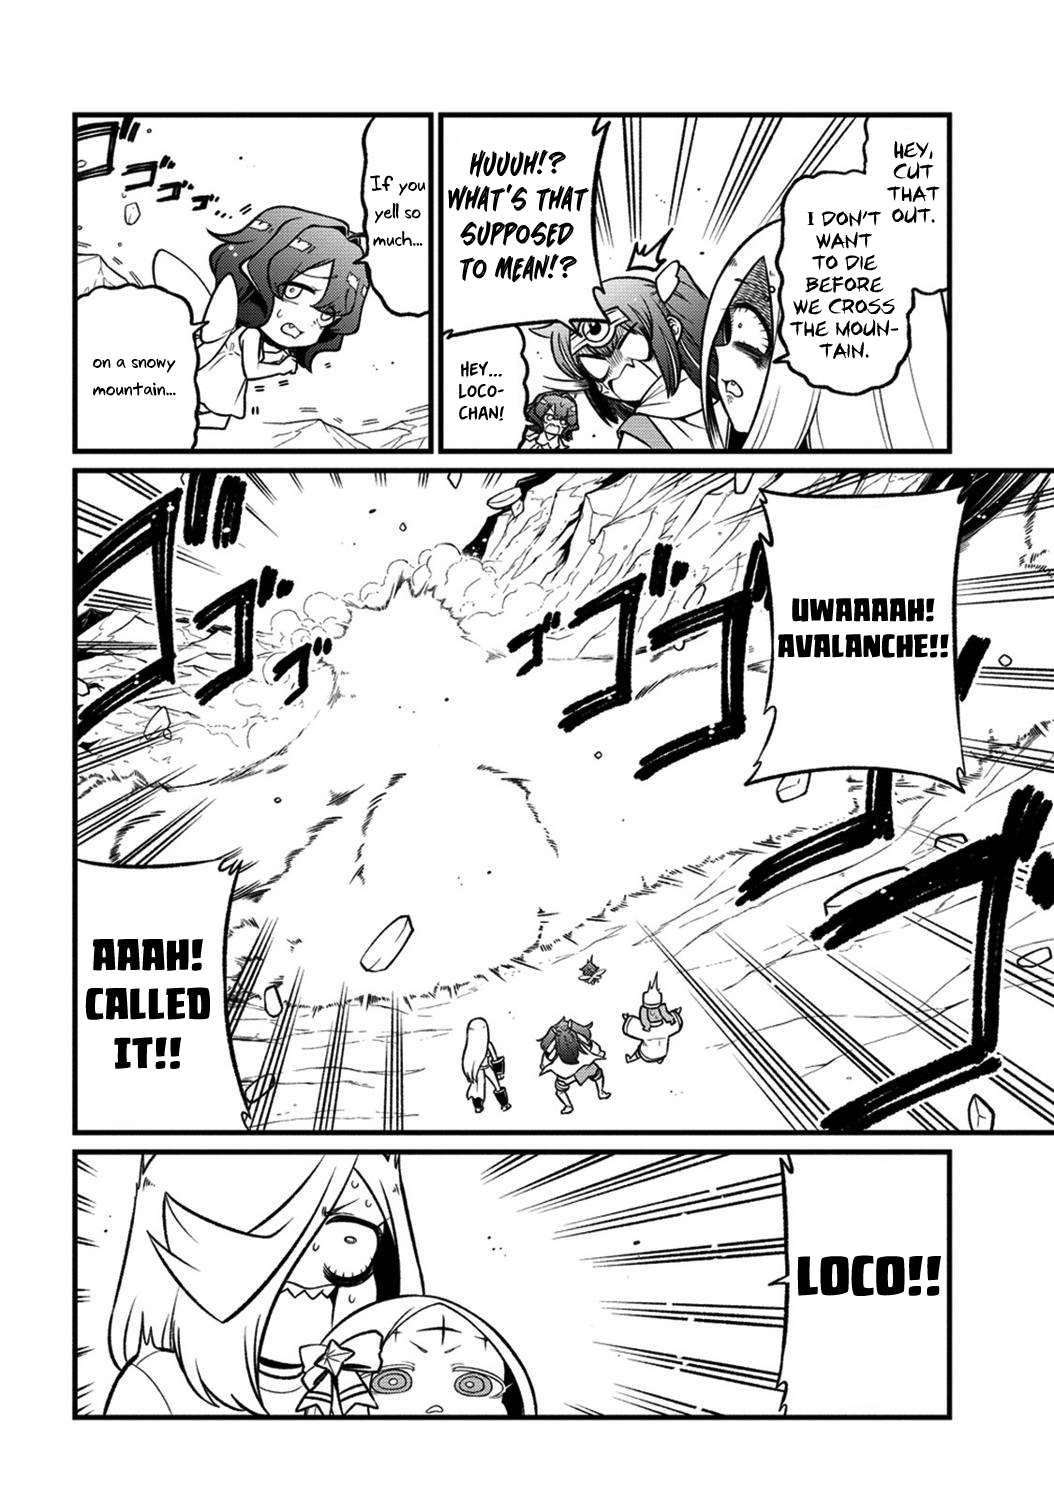 Gushing over Magical Girls - chapter 55 - #2